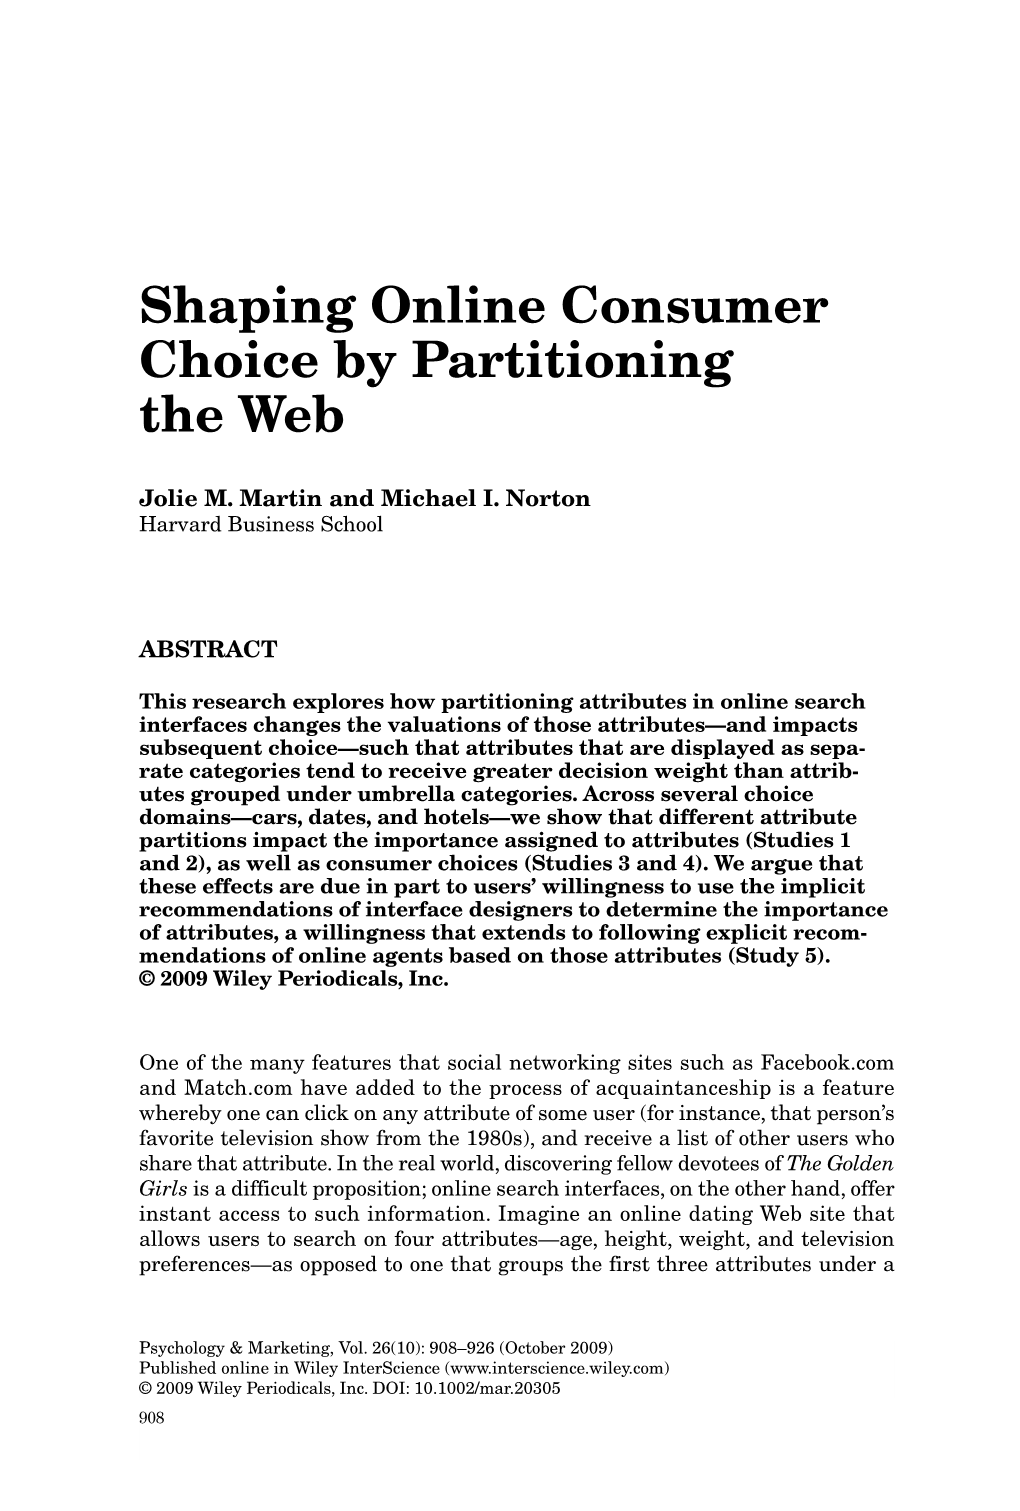 Shaping Online Consumer Choice by Partitioning the Web